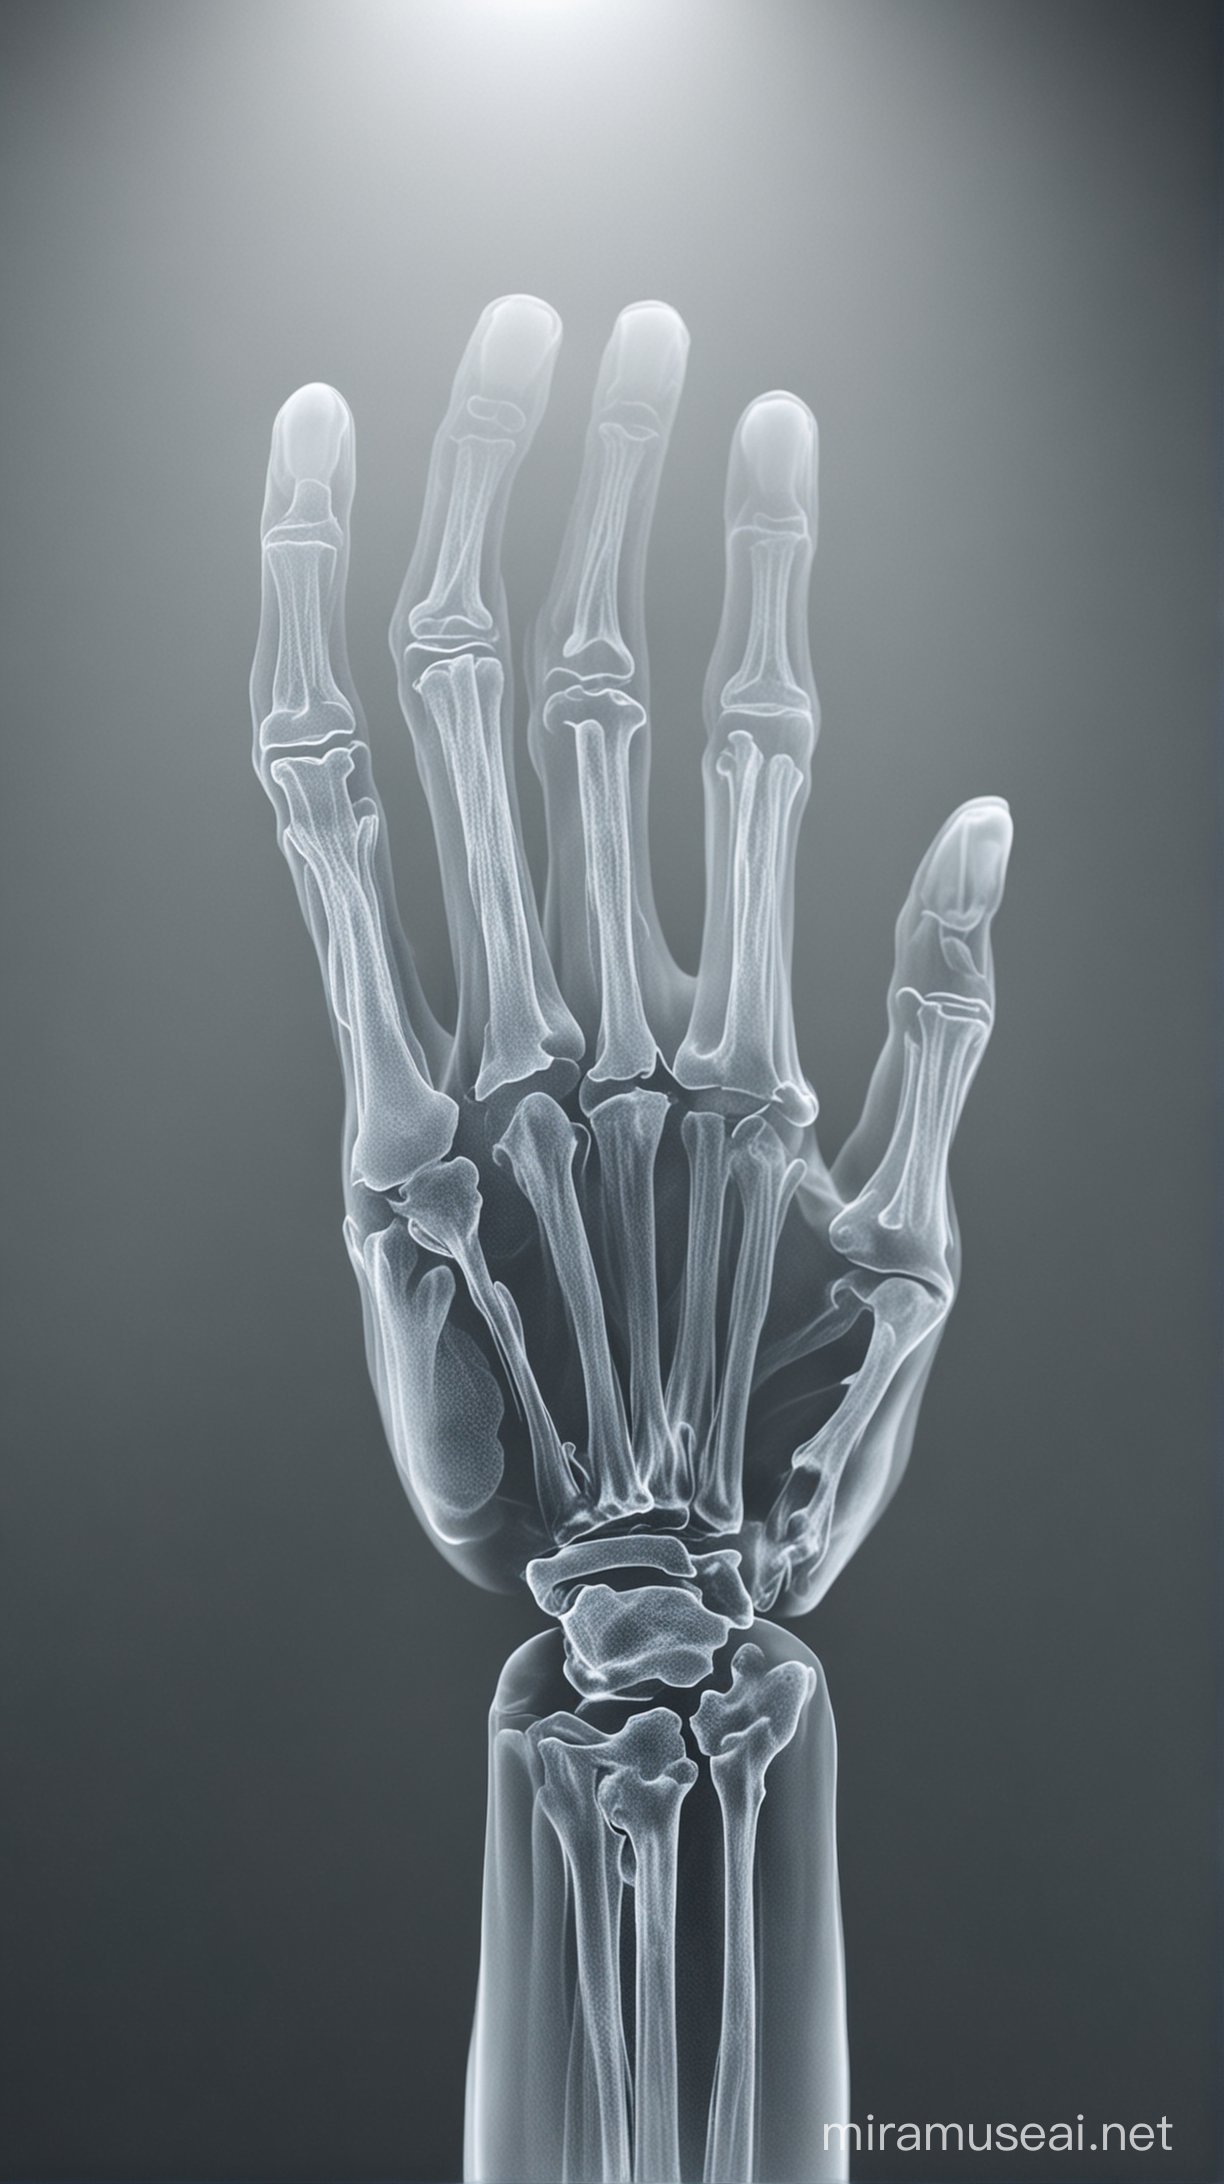 Hand Bone XRay on Natural Background in 4K HDR Morning Lighting